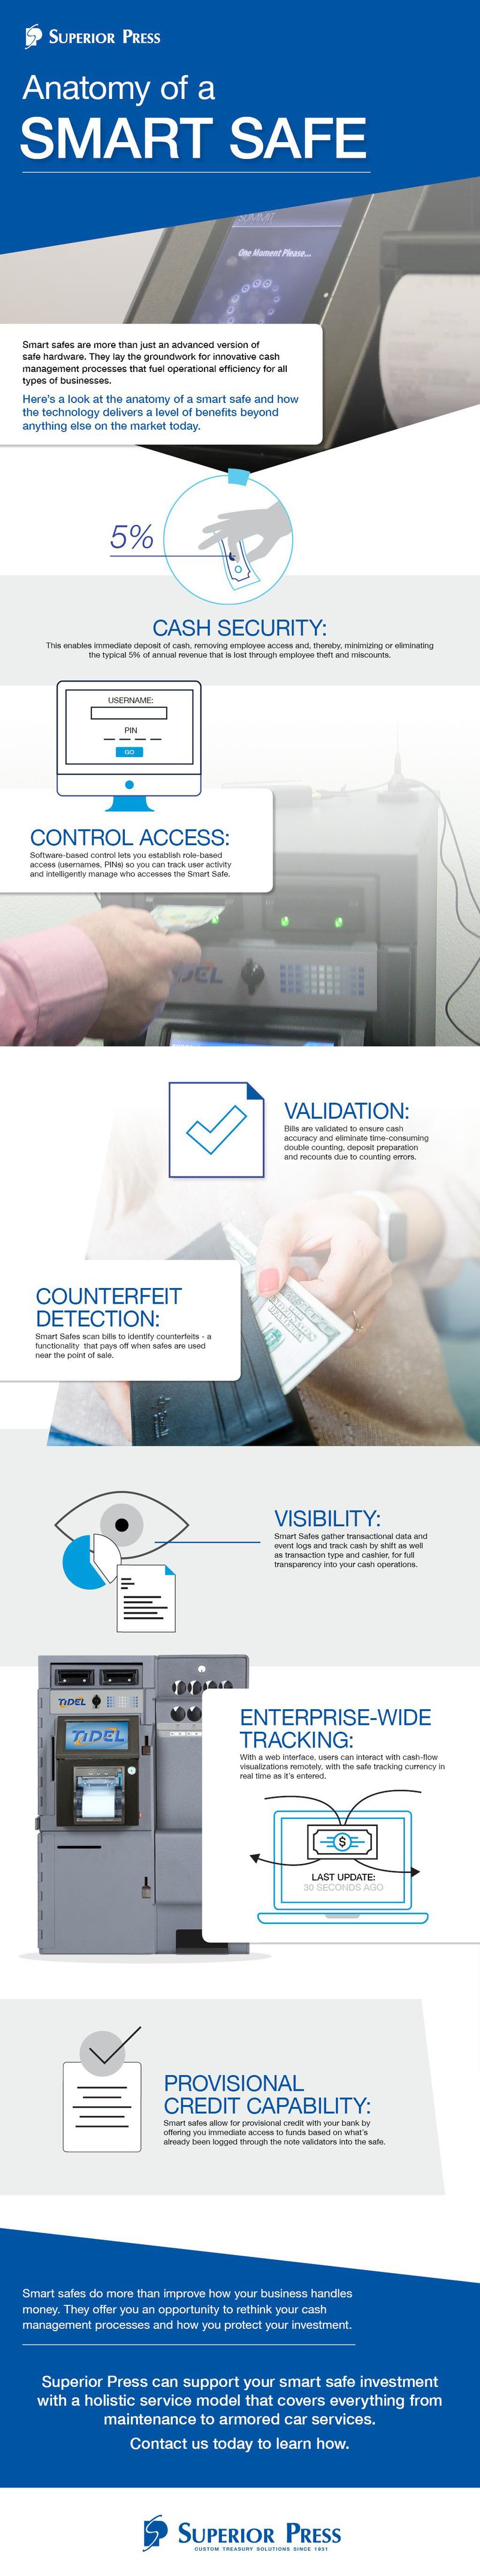 The anatomy of a smart safe [infographic]